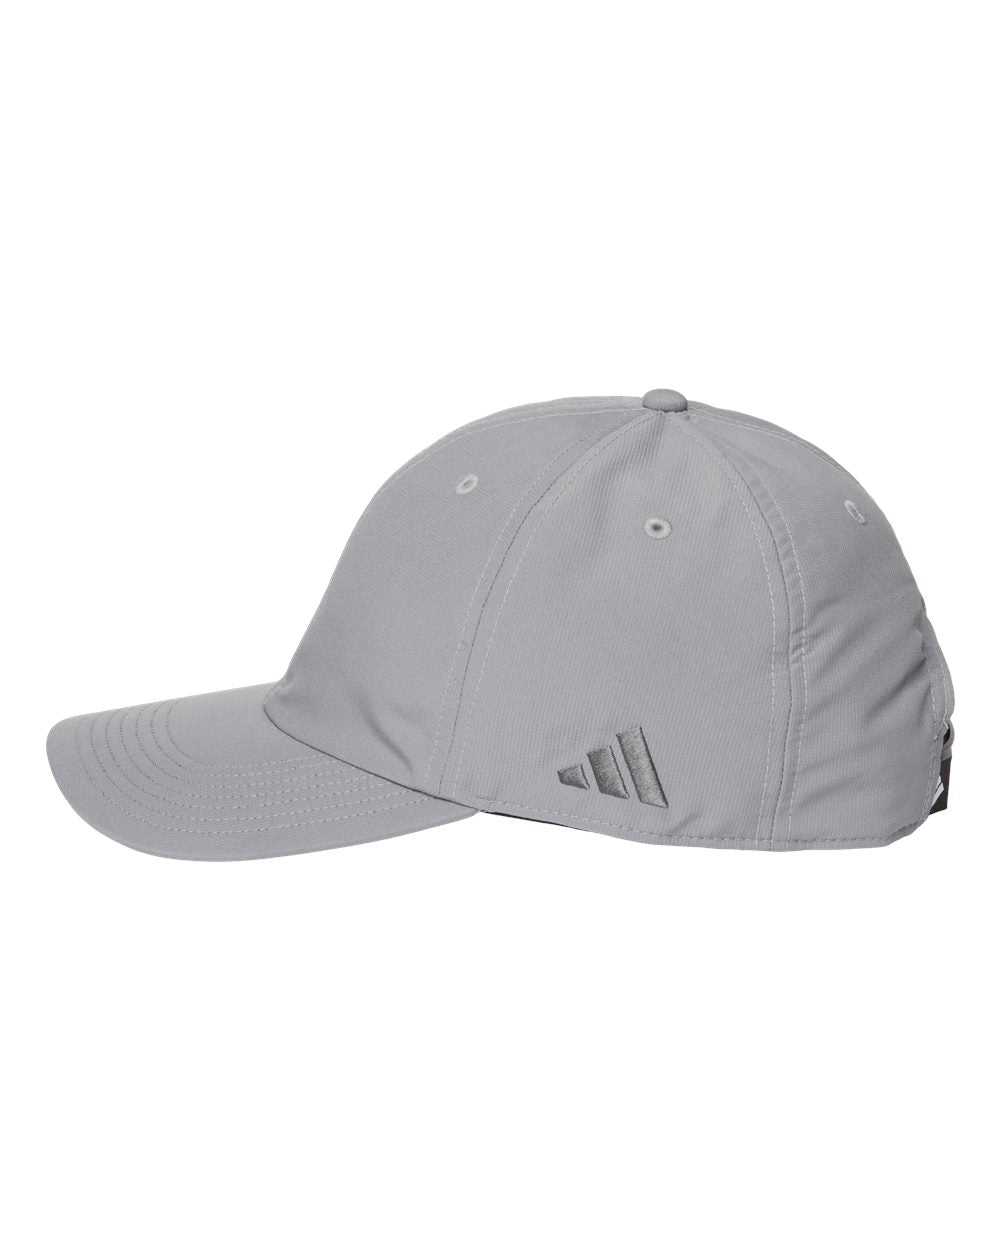 Adidas A600S Sustainable Performance Max Cap - Gray Three - HIT a Double - 2